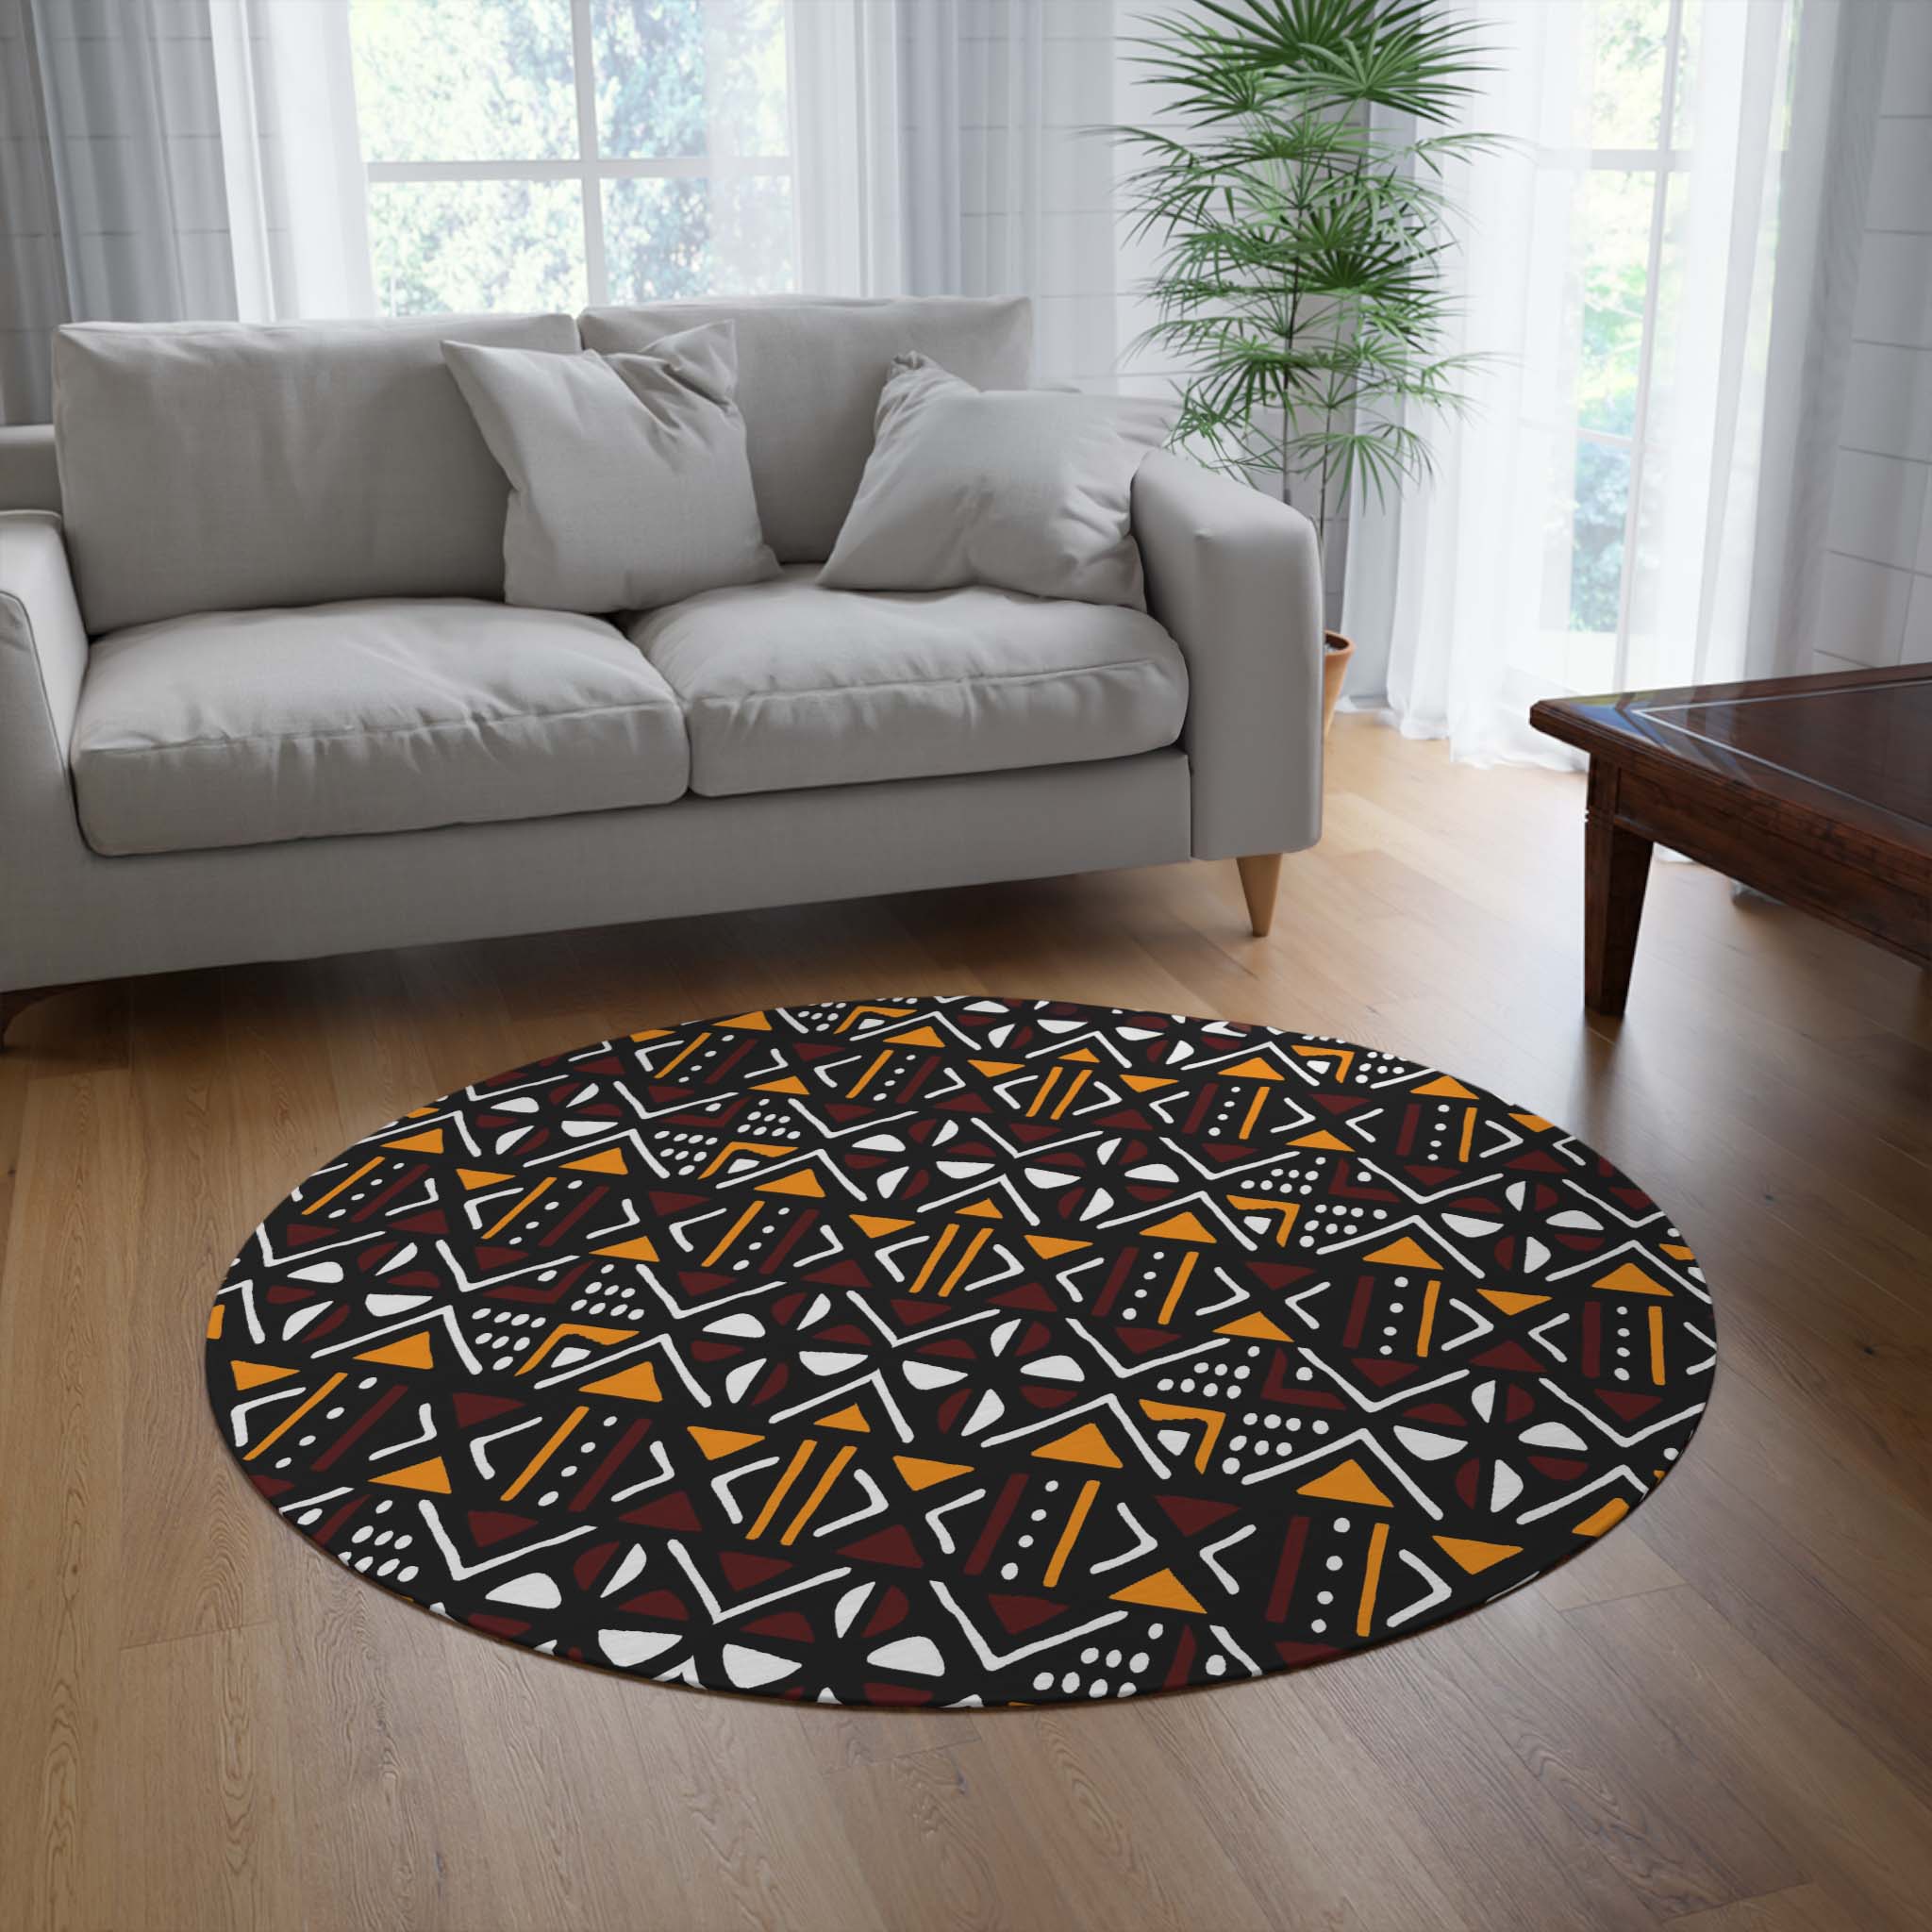 African Inspired Rug Round Carpet Mudcloth Print - Bynelo